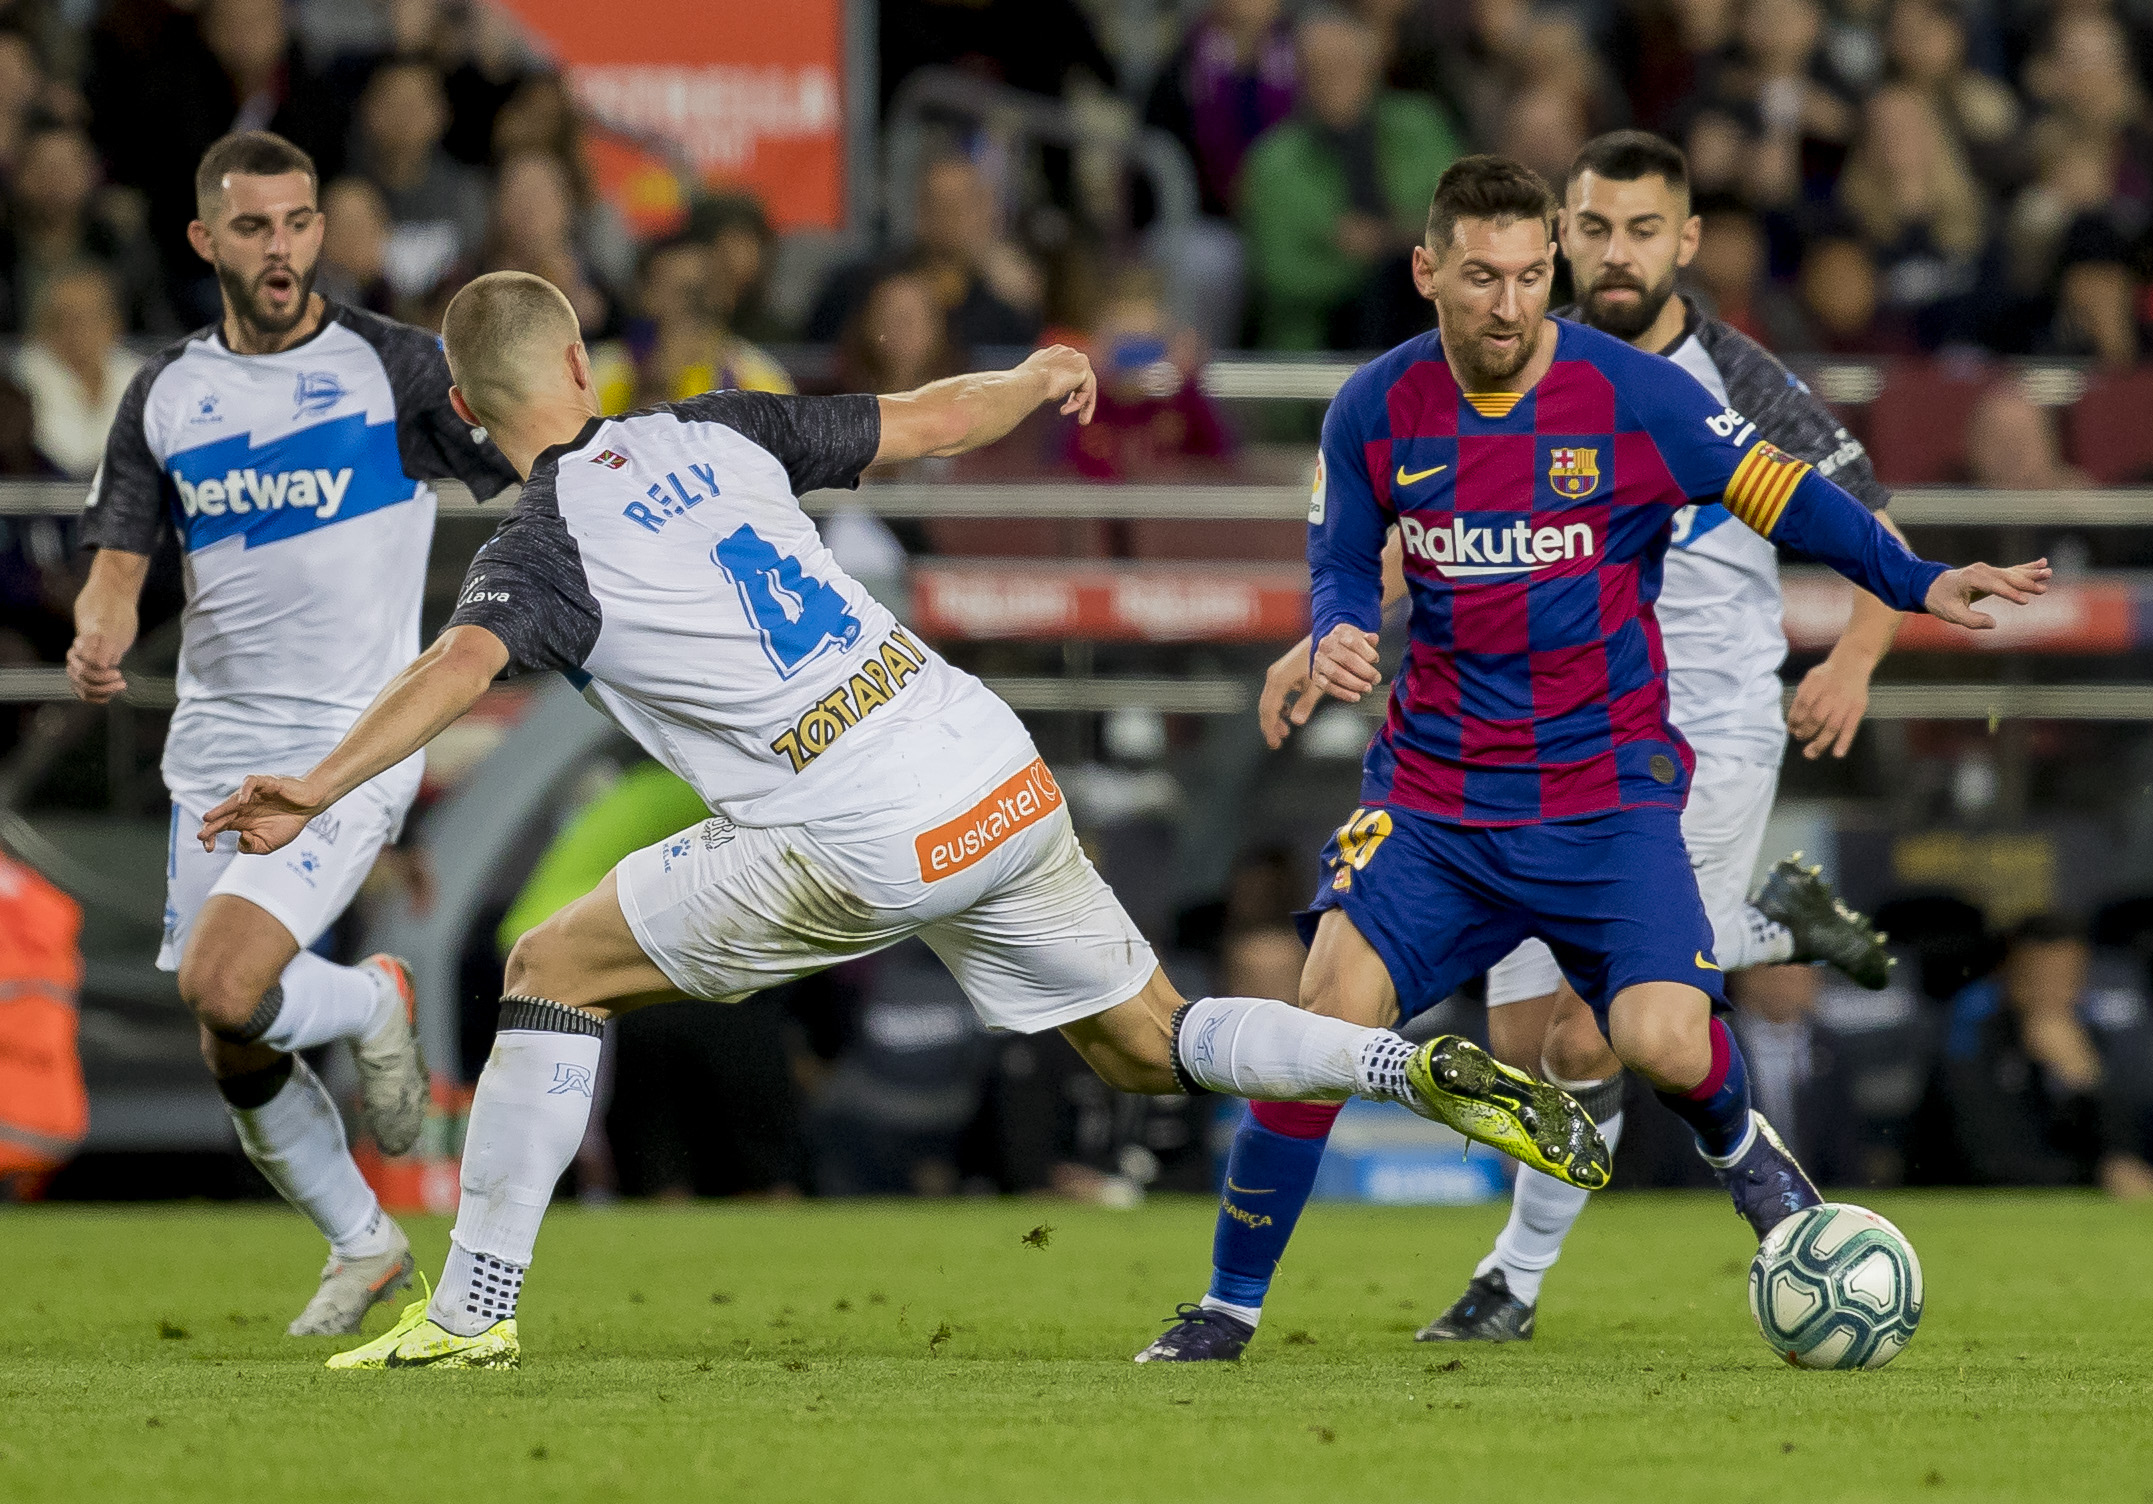 Barcelona's Lionel Messi, left, drives the ball during a Spanish La Liga soccer match between Barcelona and Alaves at Camp Nou stadium in Barcelona, Spain, Saturday, Dec. 21, 2019. (AP Photo/Joan Monfort)